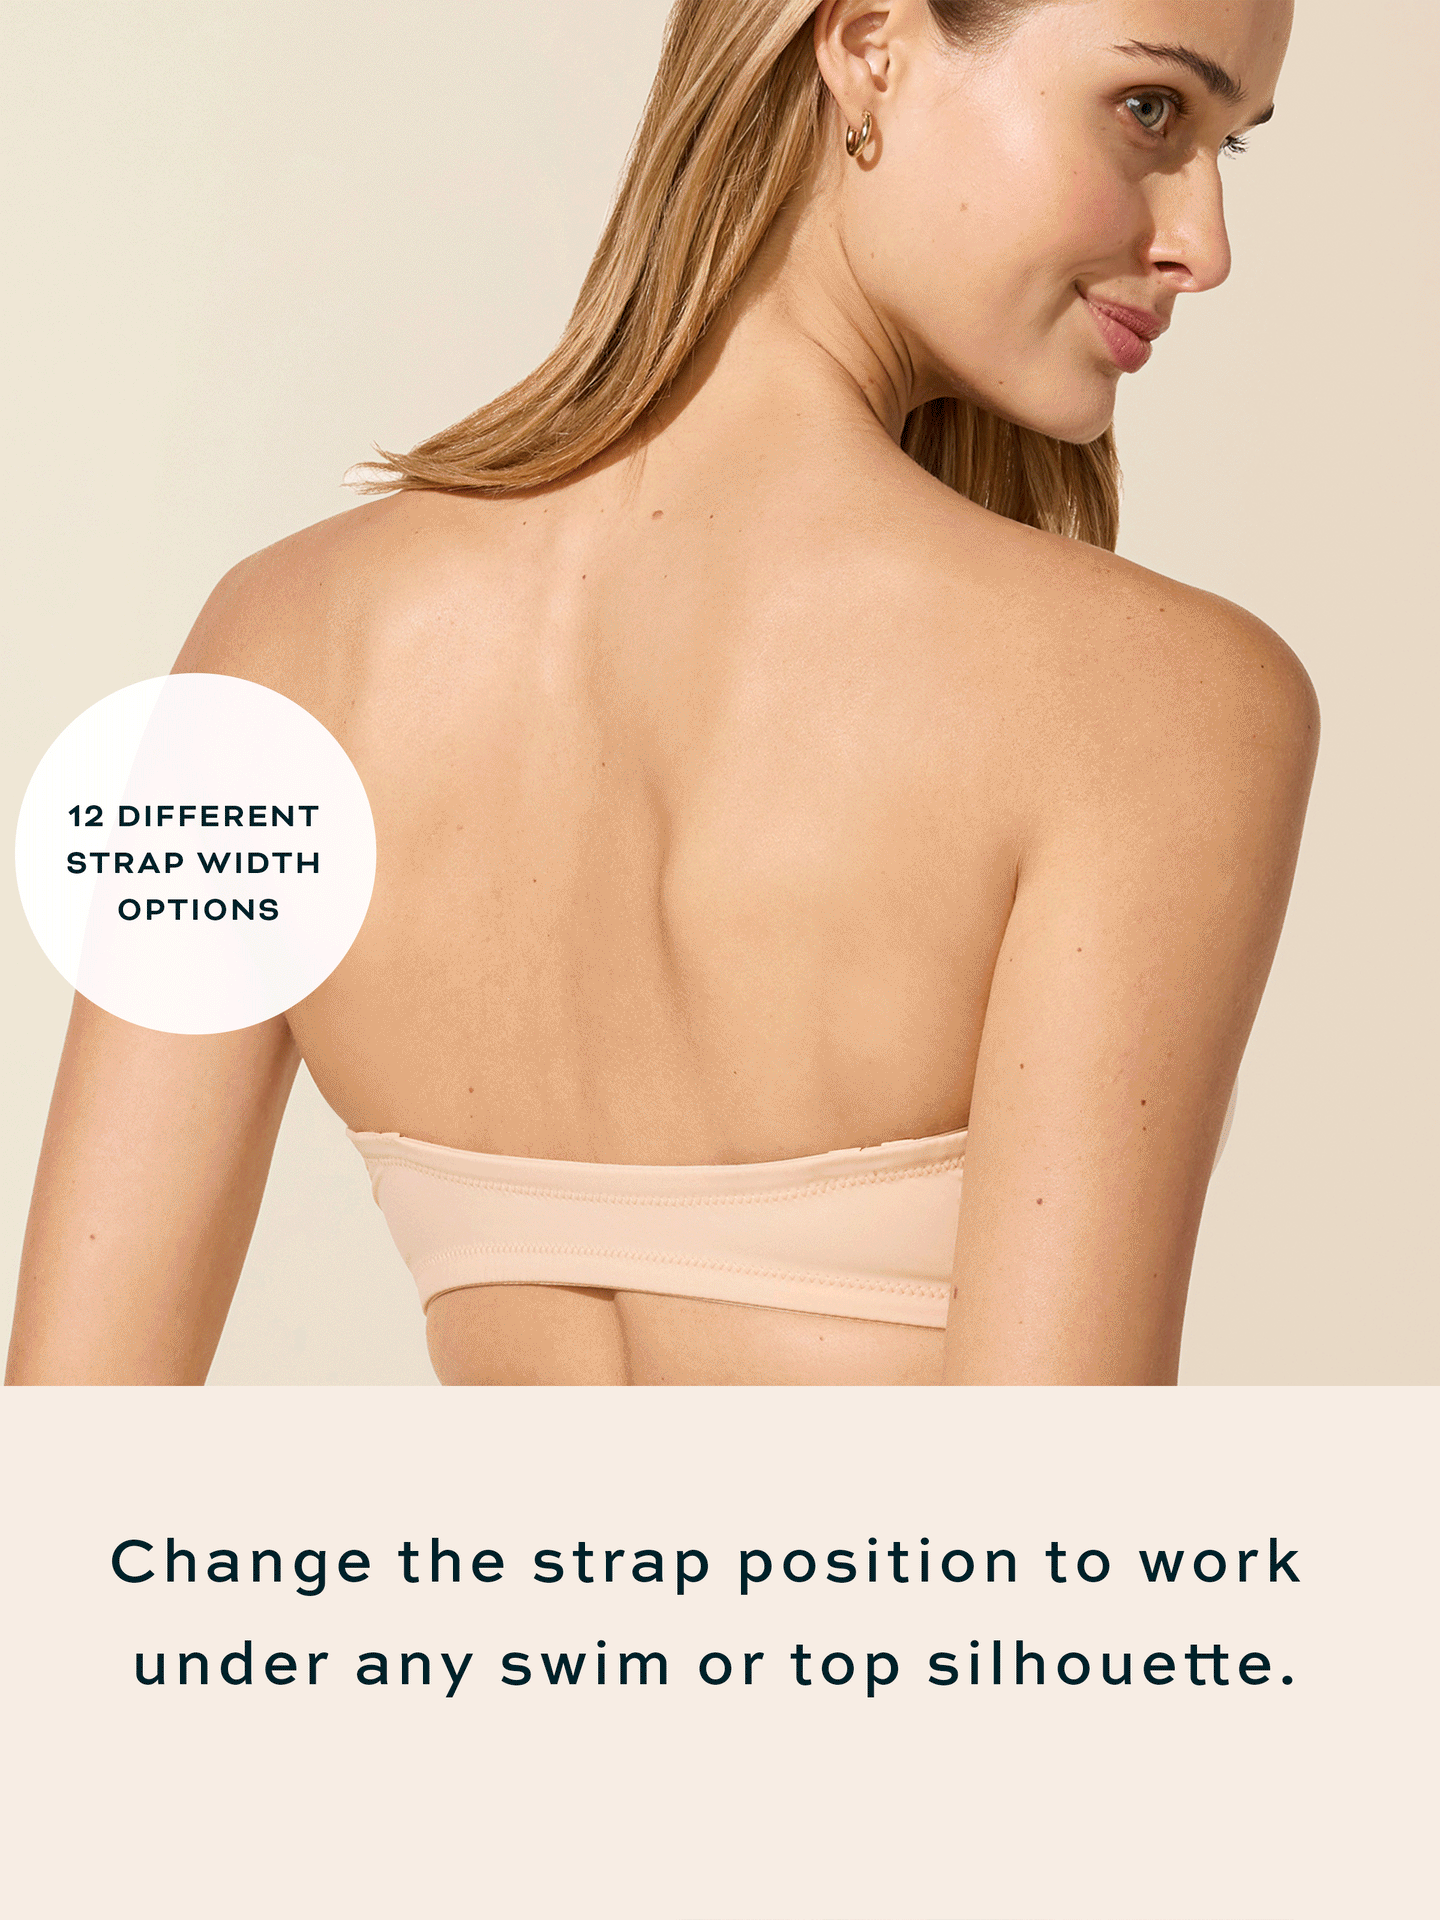 Magic Boobs Body Shaper Bra – The Perfect Solution to Eliminate Back Fat